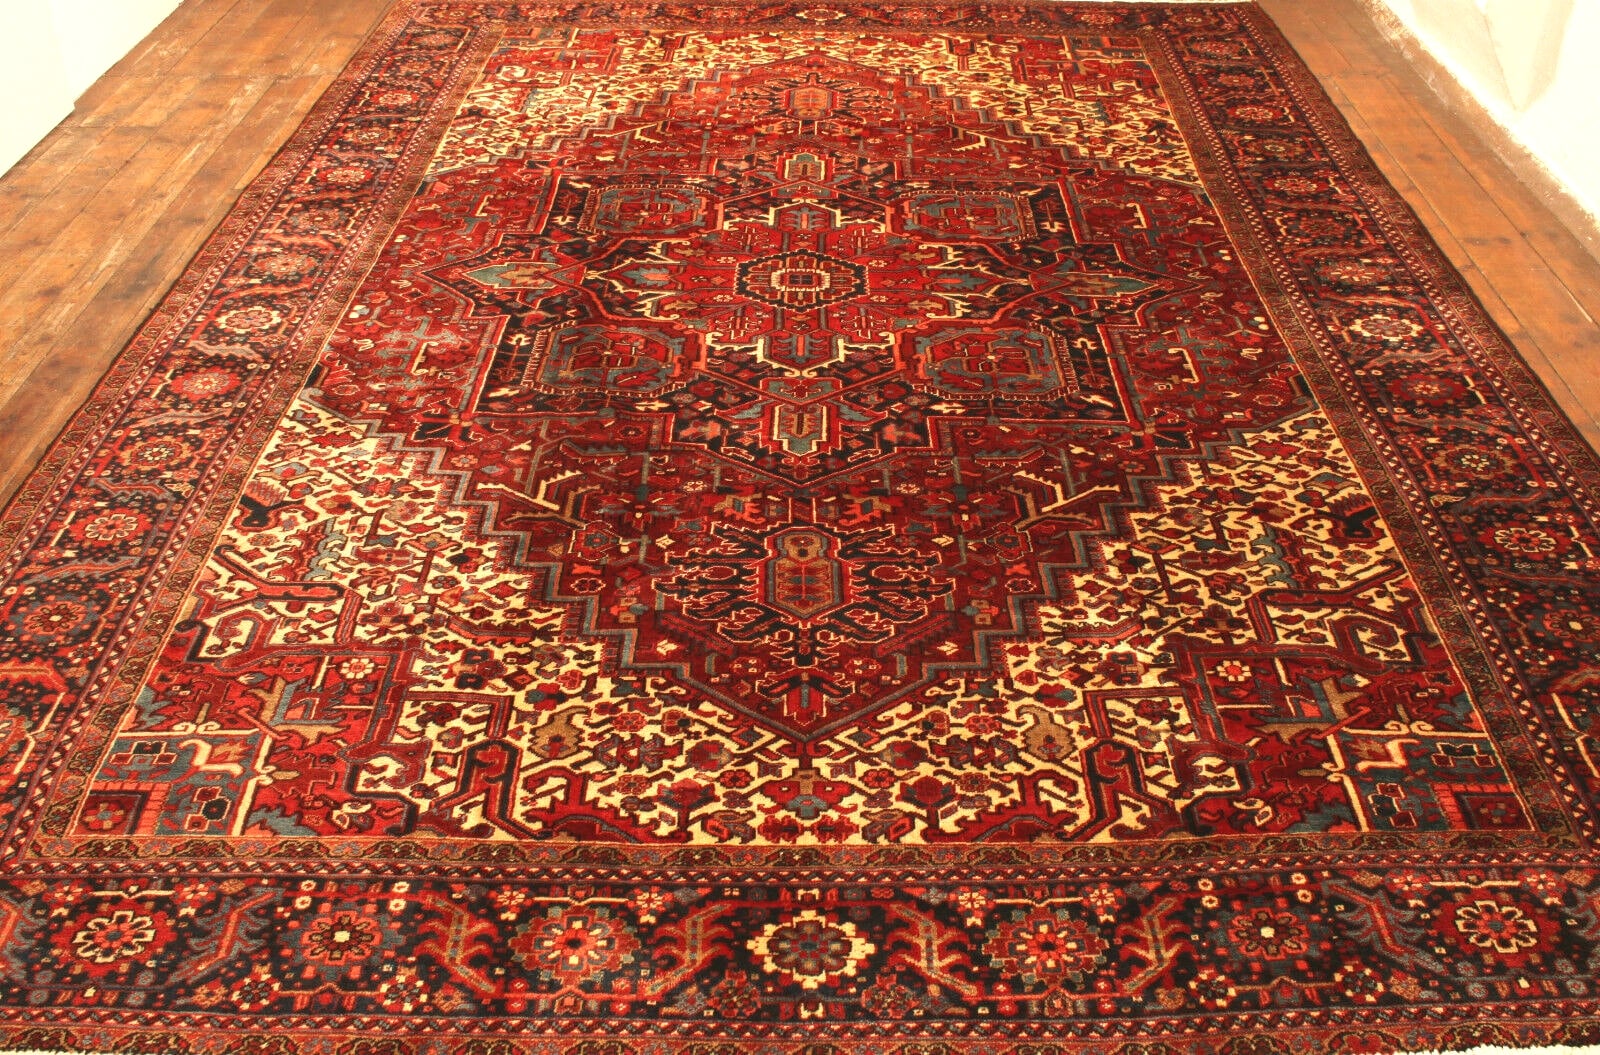 Close-up of the enduring beauty of the Handmade Vintage Persian Style Heriz Rug